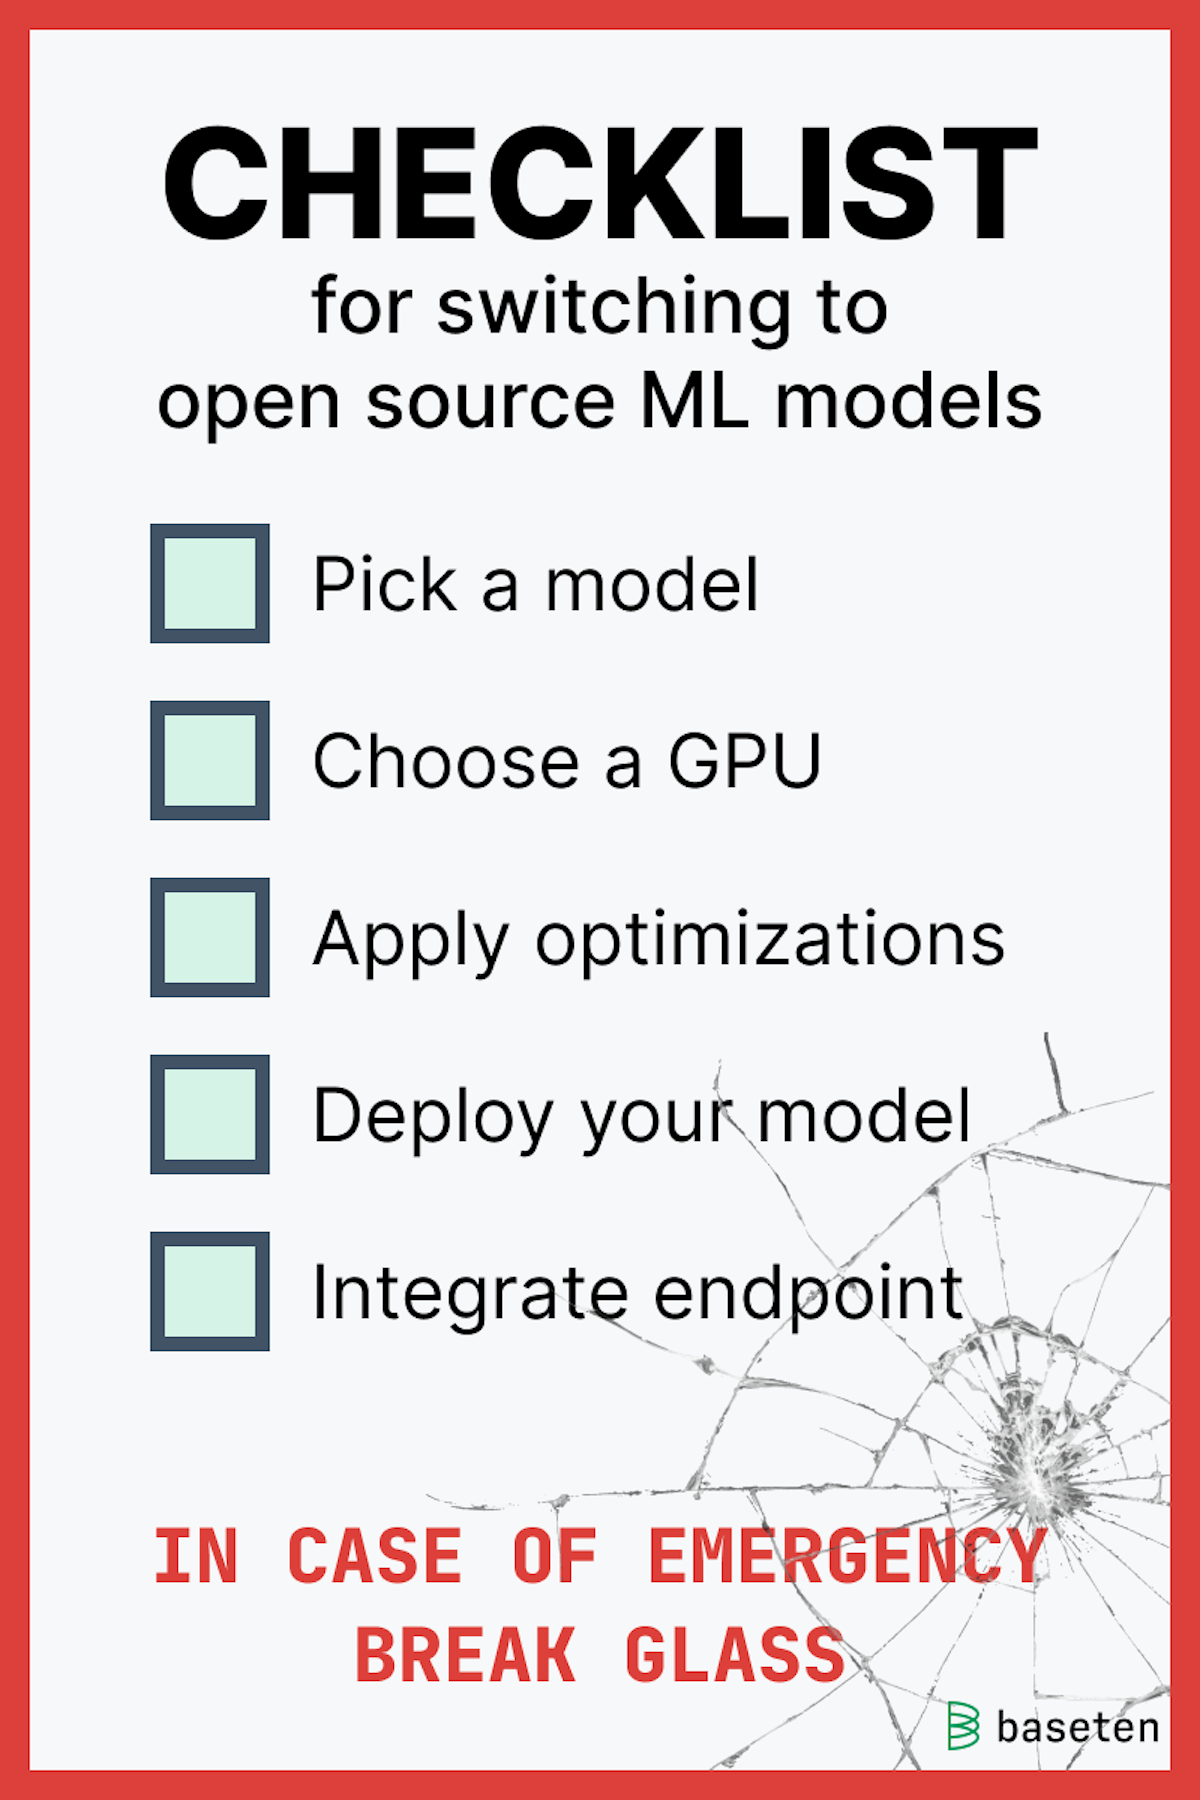 A checklist for switching to open source ML models